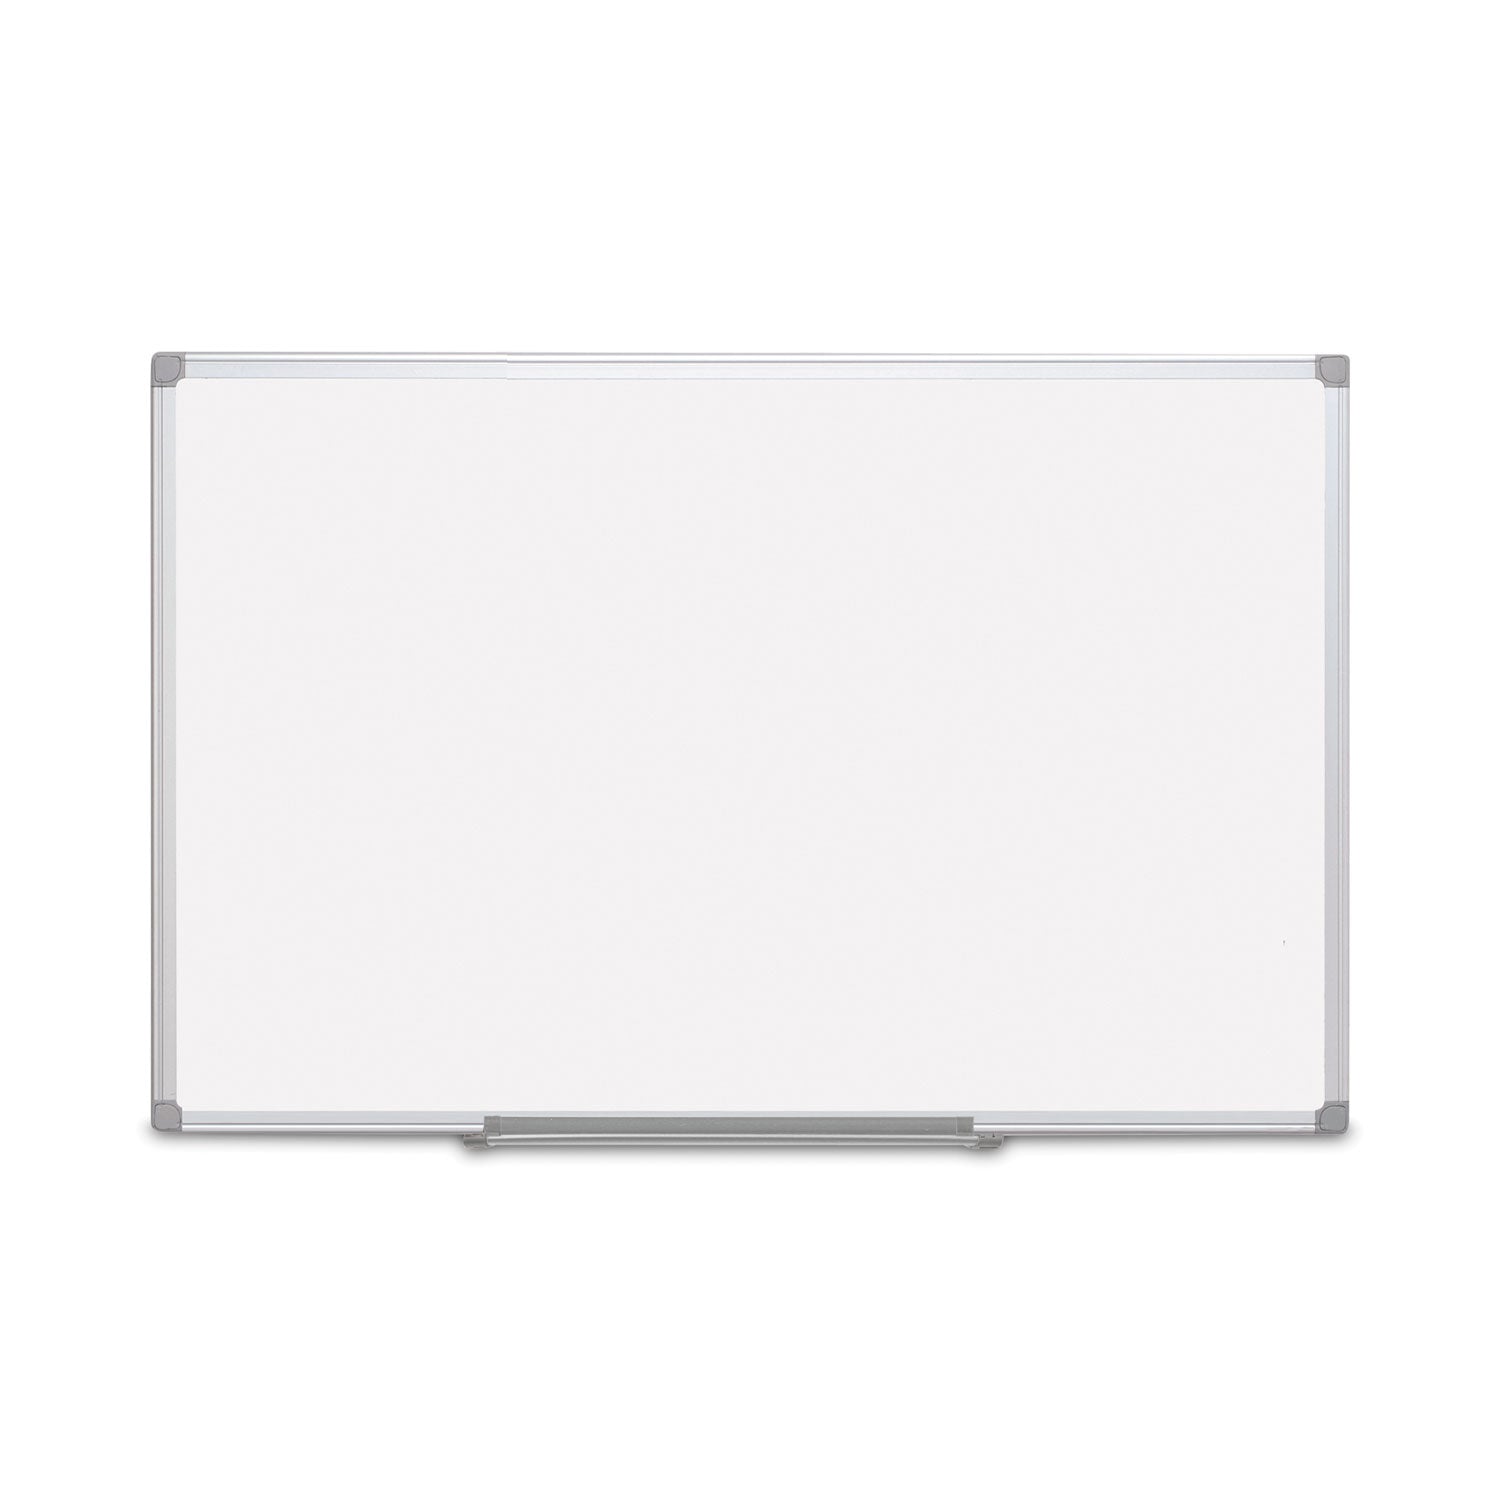 earth-silver-easy-clean-dry-erase-board-72-x-48-white-surface-silver-aluminum-frame_bvccr1220790 - 1